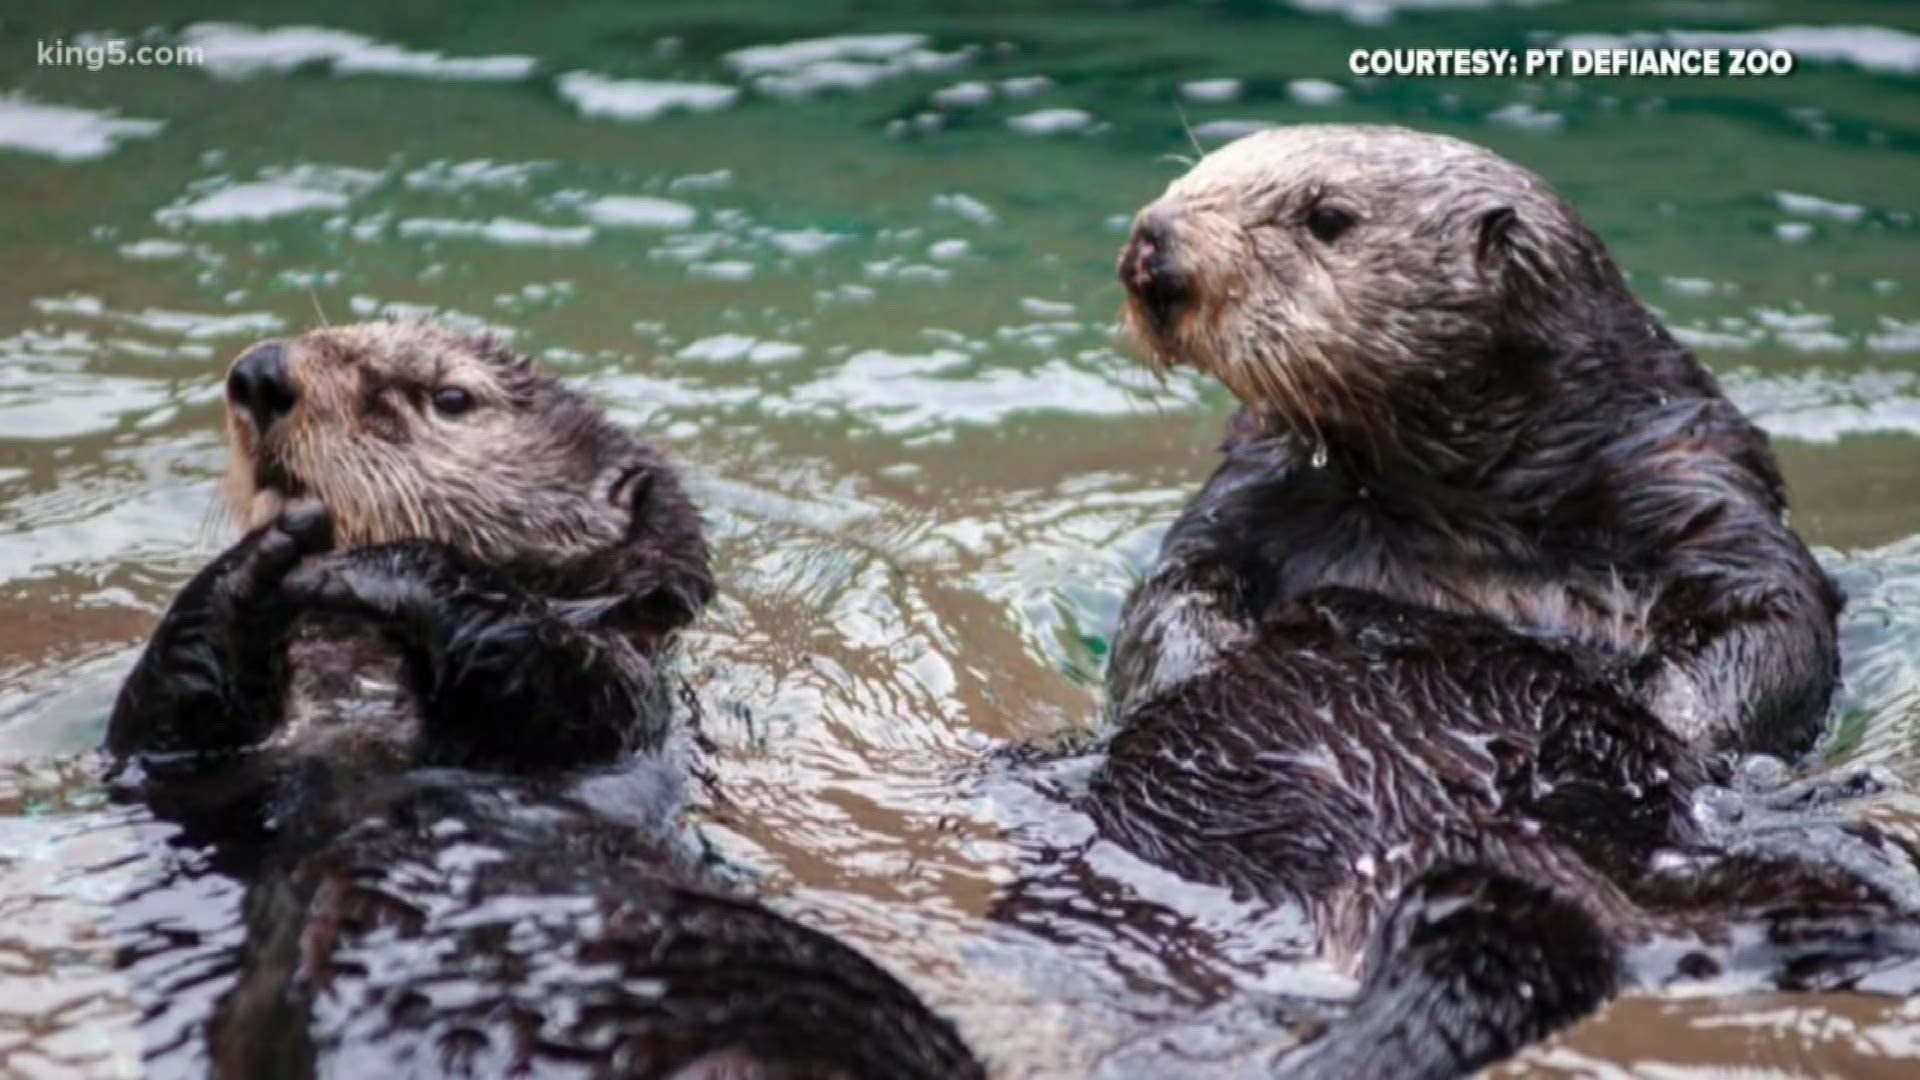 A 10-year-old Southern sea otter will join the “raft” of sea otters at the Point Defiance Zoo & Aquarium in Tacoma.